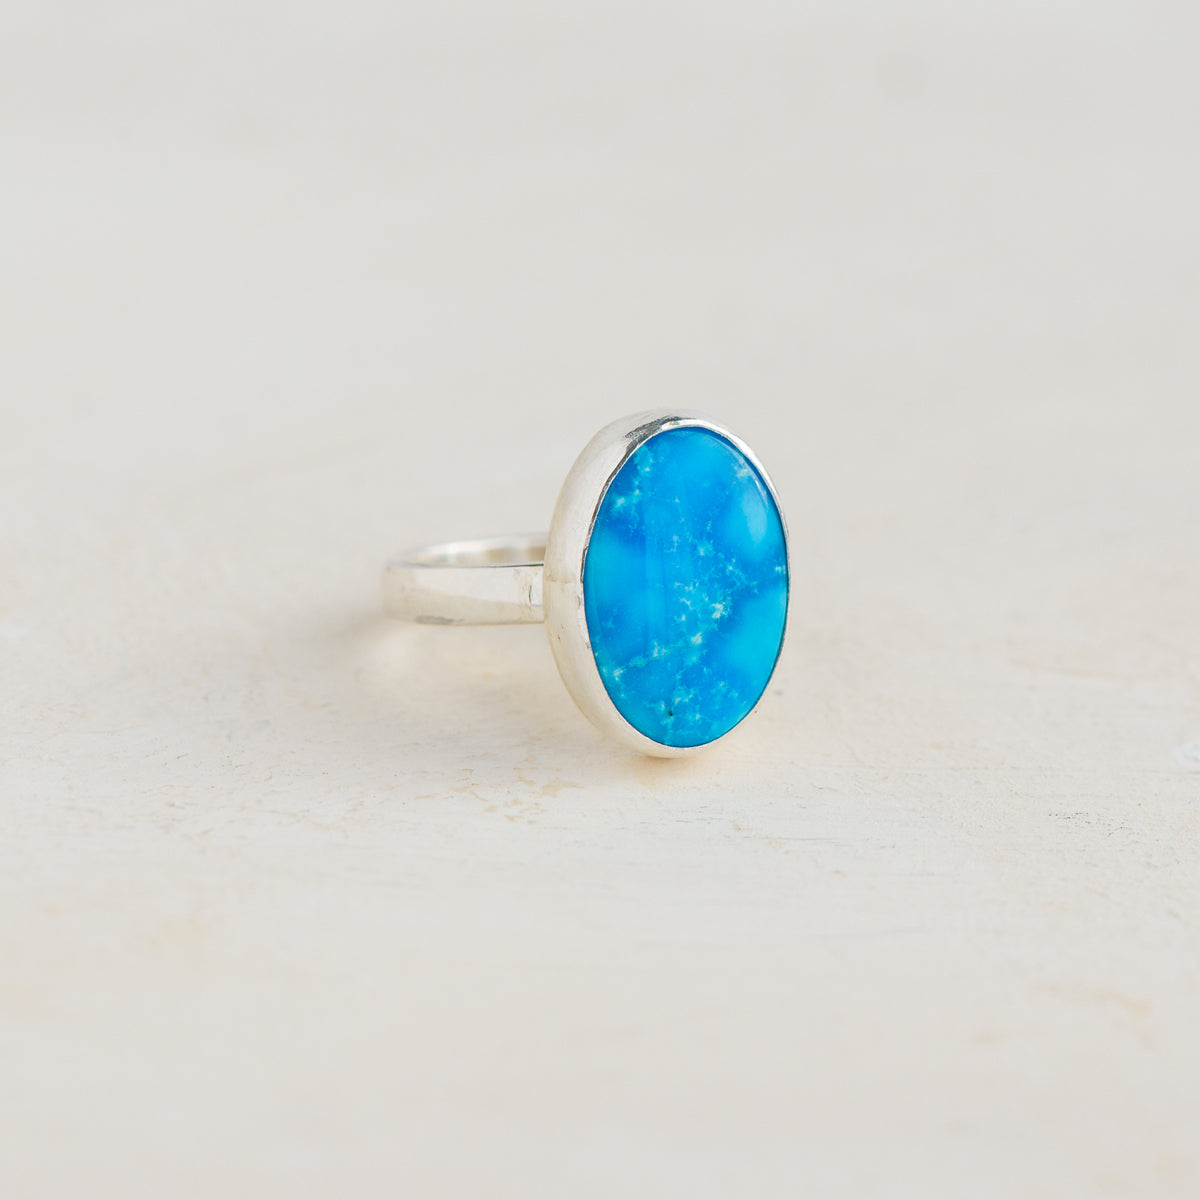 Bright Blue Oval Kingman Turquoise Ring on Sterling Silver Band